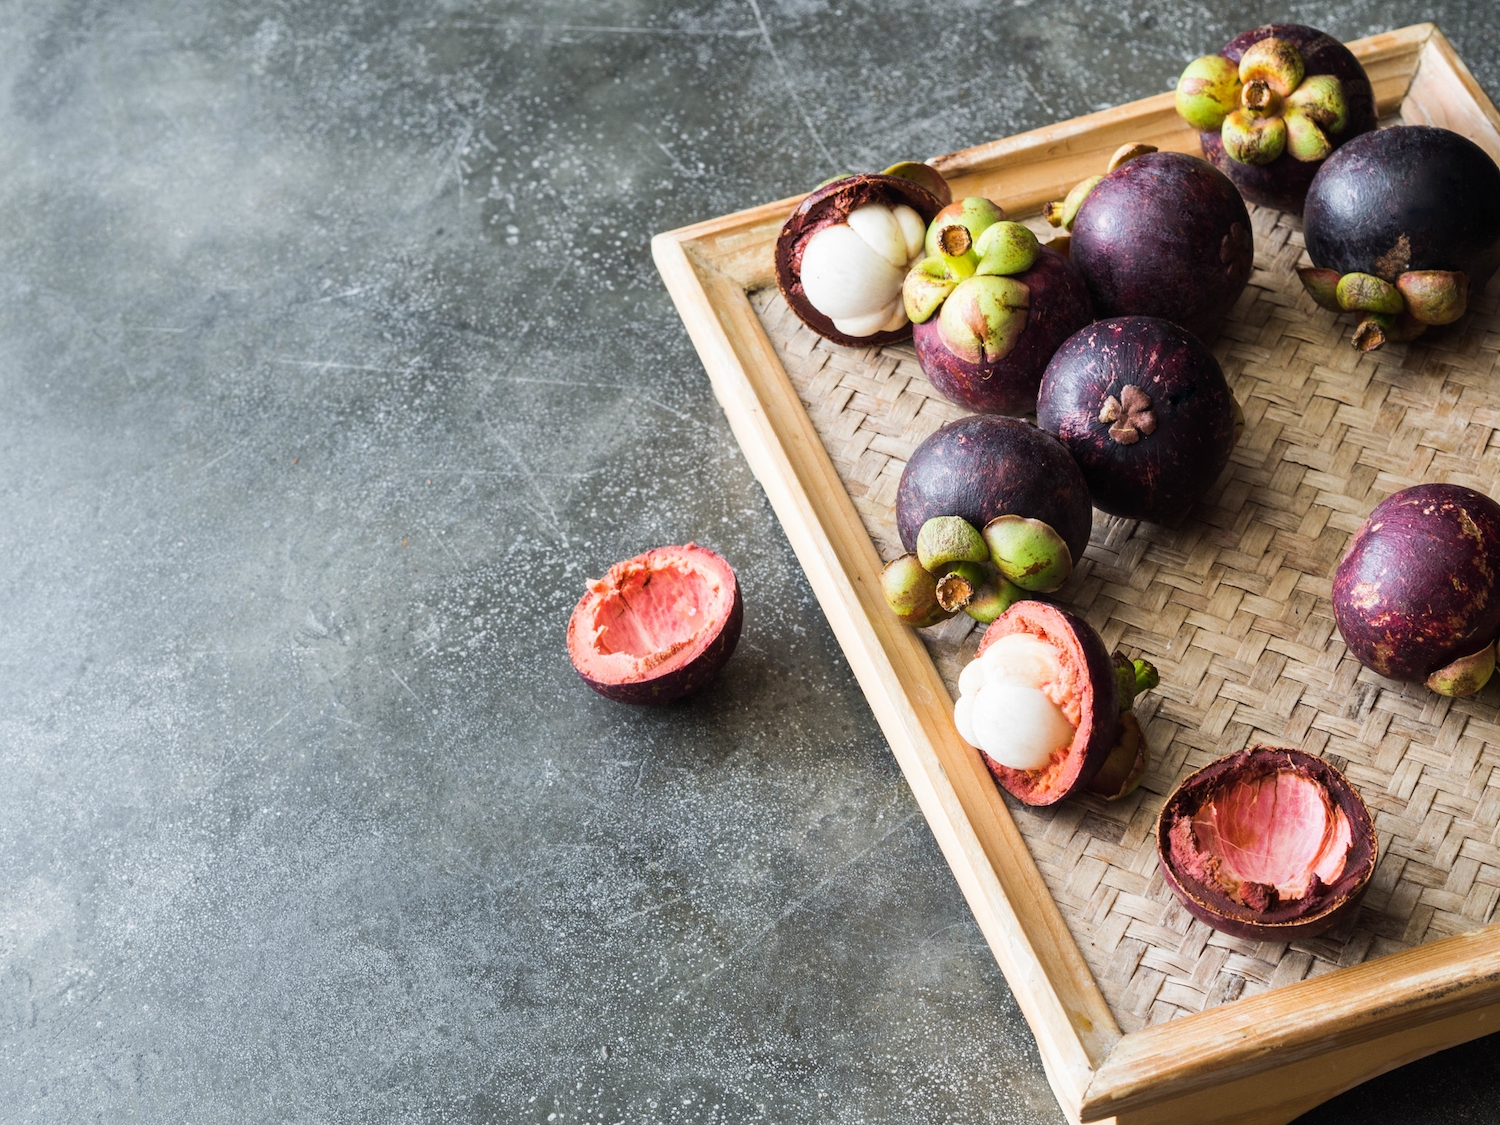 Thai queen of fruits - Mangosteen is  Organic fruit on the wooden tray. Fresh mangosteens on grey background. Selective focus. Copy space